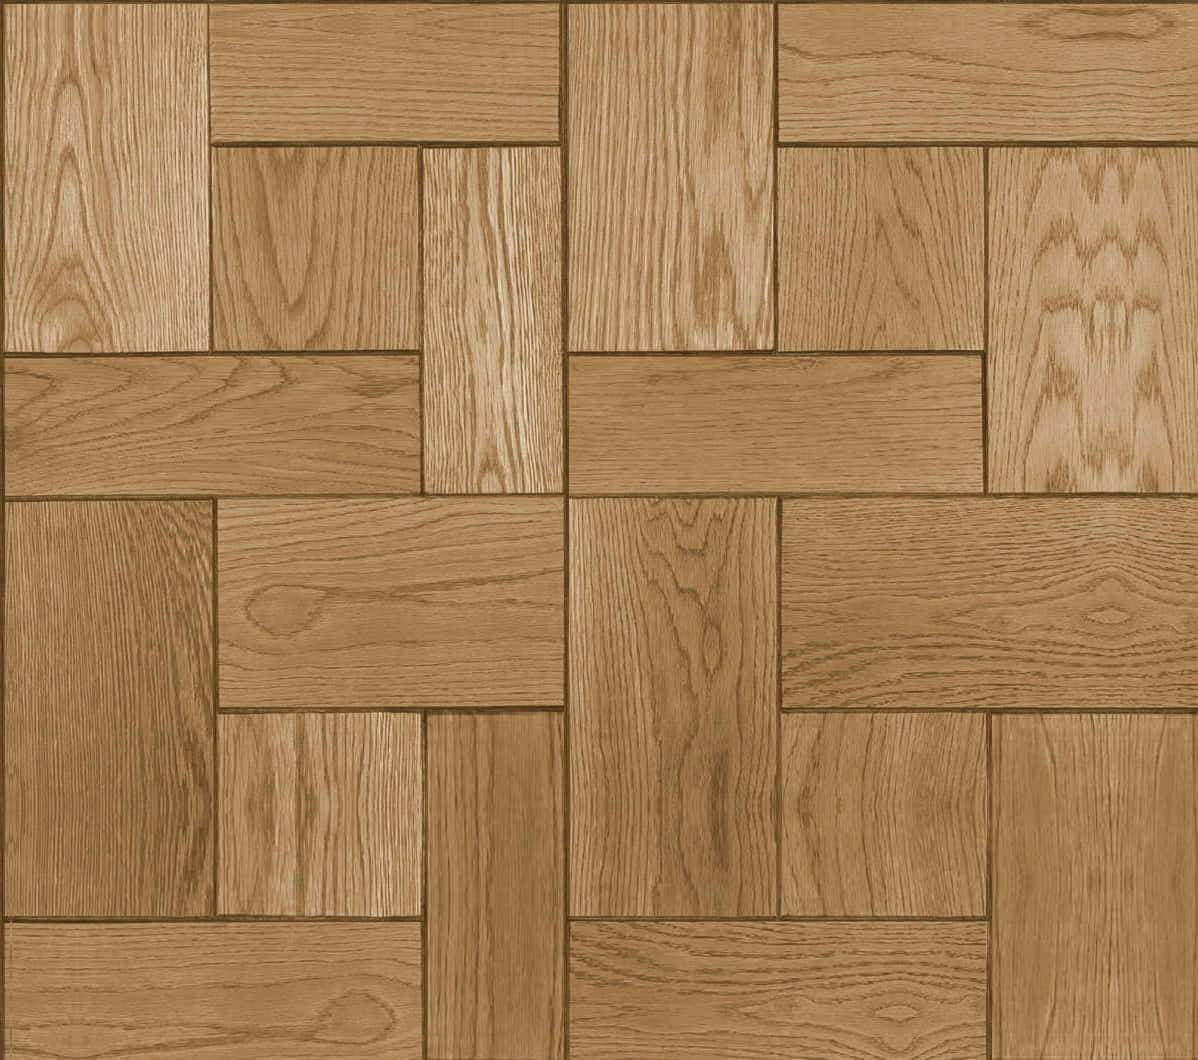 A Close Up Of A Wooden Floor With A Pattern